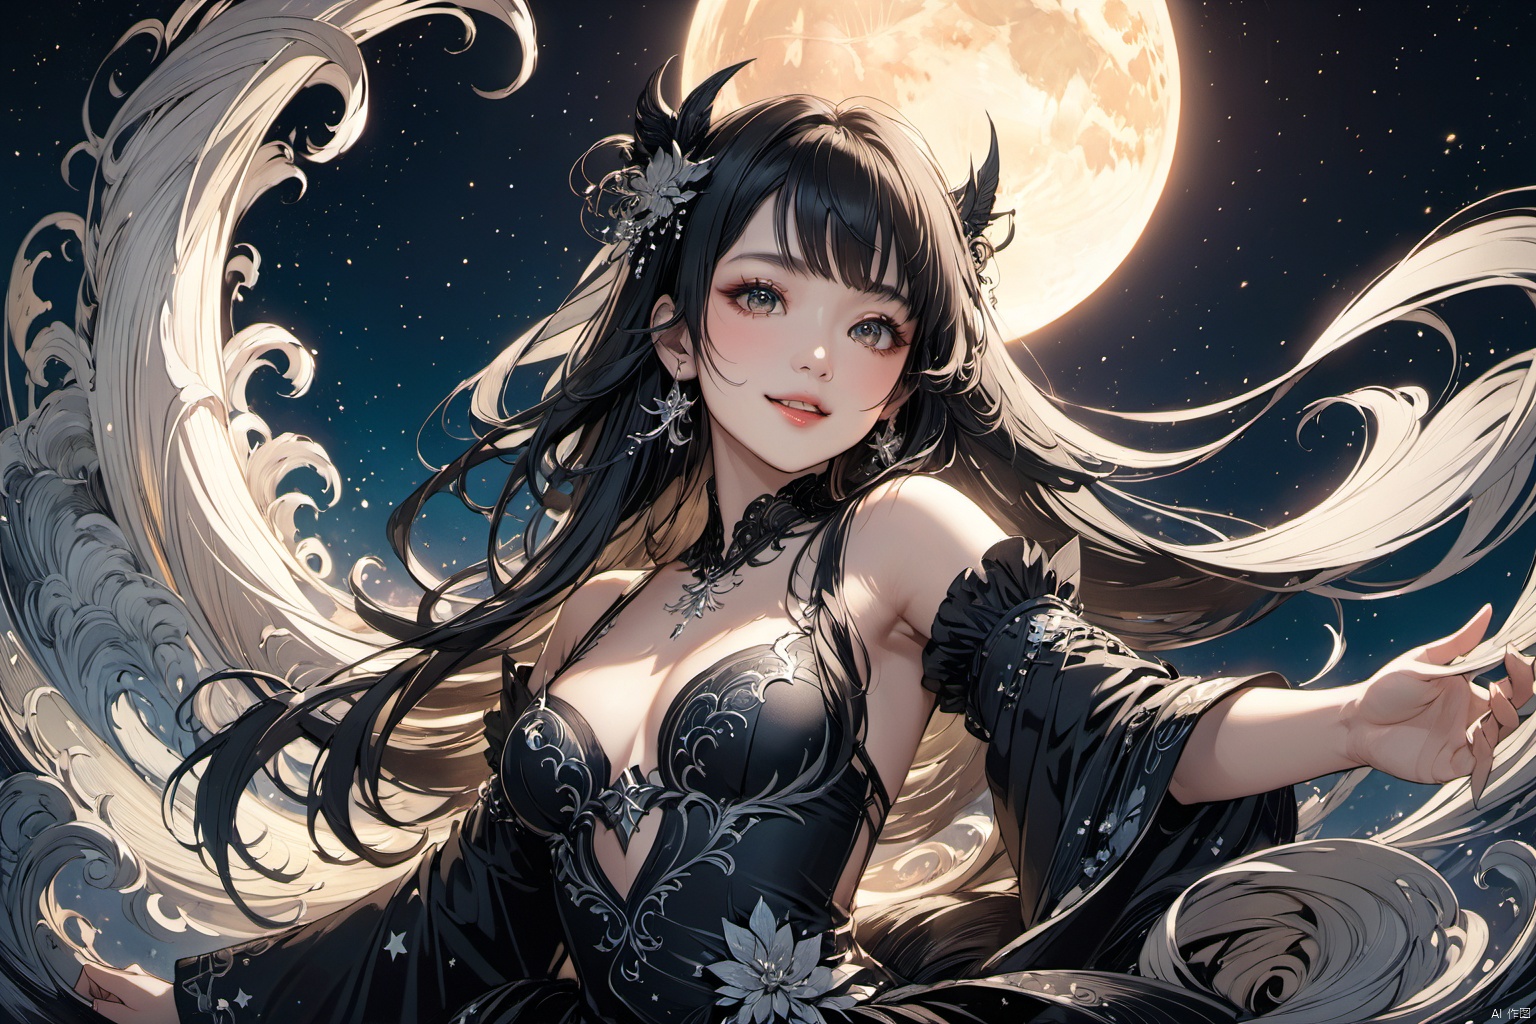 ultra-detailed,(best quality),((masterpiece)),(highres),original,extremely detailed 8K wallpaper,(an extremely delicate and beautiful),anime,  (close up  , solo), black  theme, 

An epic fantasy illustration featuring a succubus with striking long hair and captivating eyes, enchanting all who behold her with a mesmerizing smile. The scene is set against a starlit sky with a crescent moon, bathed in cinematic lighting effects to enhance the storytelling ambiance. Drawing inspiration from the vibrant and unique character designs of Yoshitaka Amano, the artwork showcases a colorful palette, intricate background details, dynamic composition, and rich emotional expressions that bring the character to life.